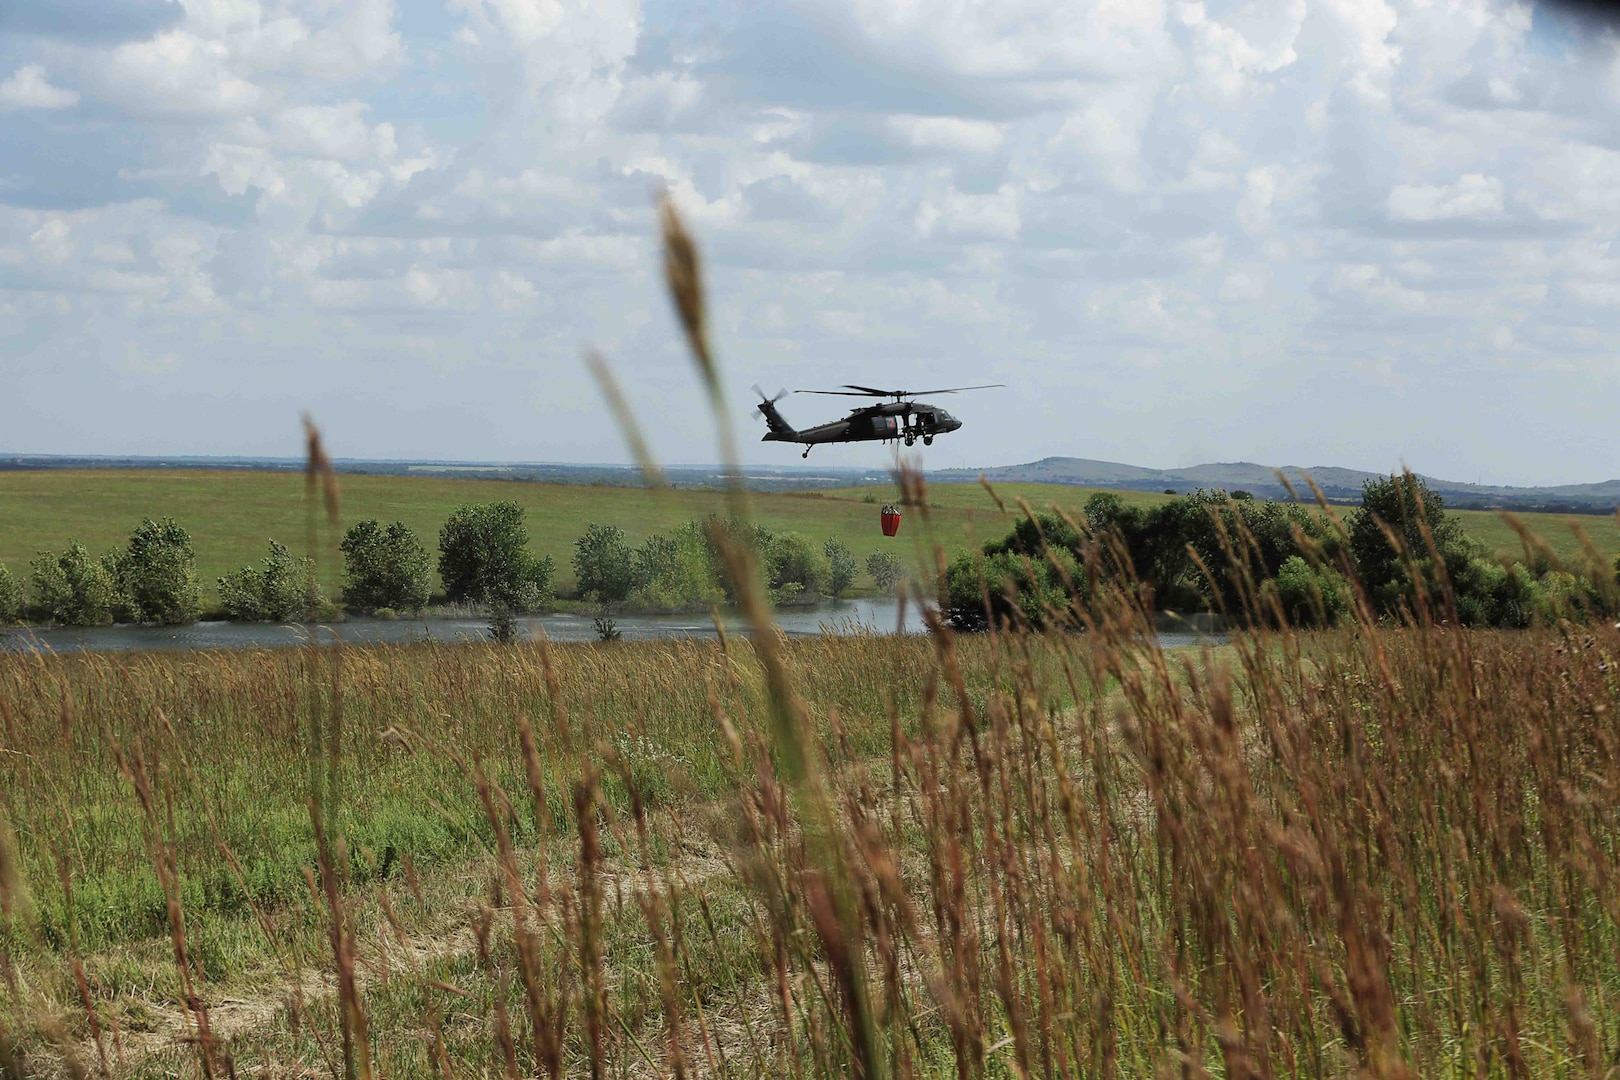 A UH-60 Black Hawk helicopter from the 1st Battalion, 108th Aviation Regiment, fills a bucket with water from a pond during an integrated wildland firefighting exercise with the Kansas Forest Service and the Kansas National Guard at the Smokey Hill Range in Salina, Kansas, Sept. 19, 2019.